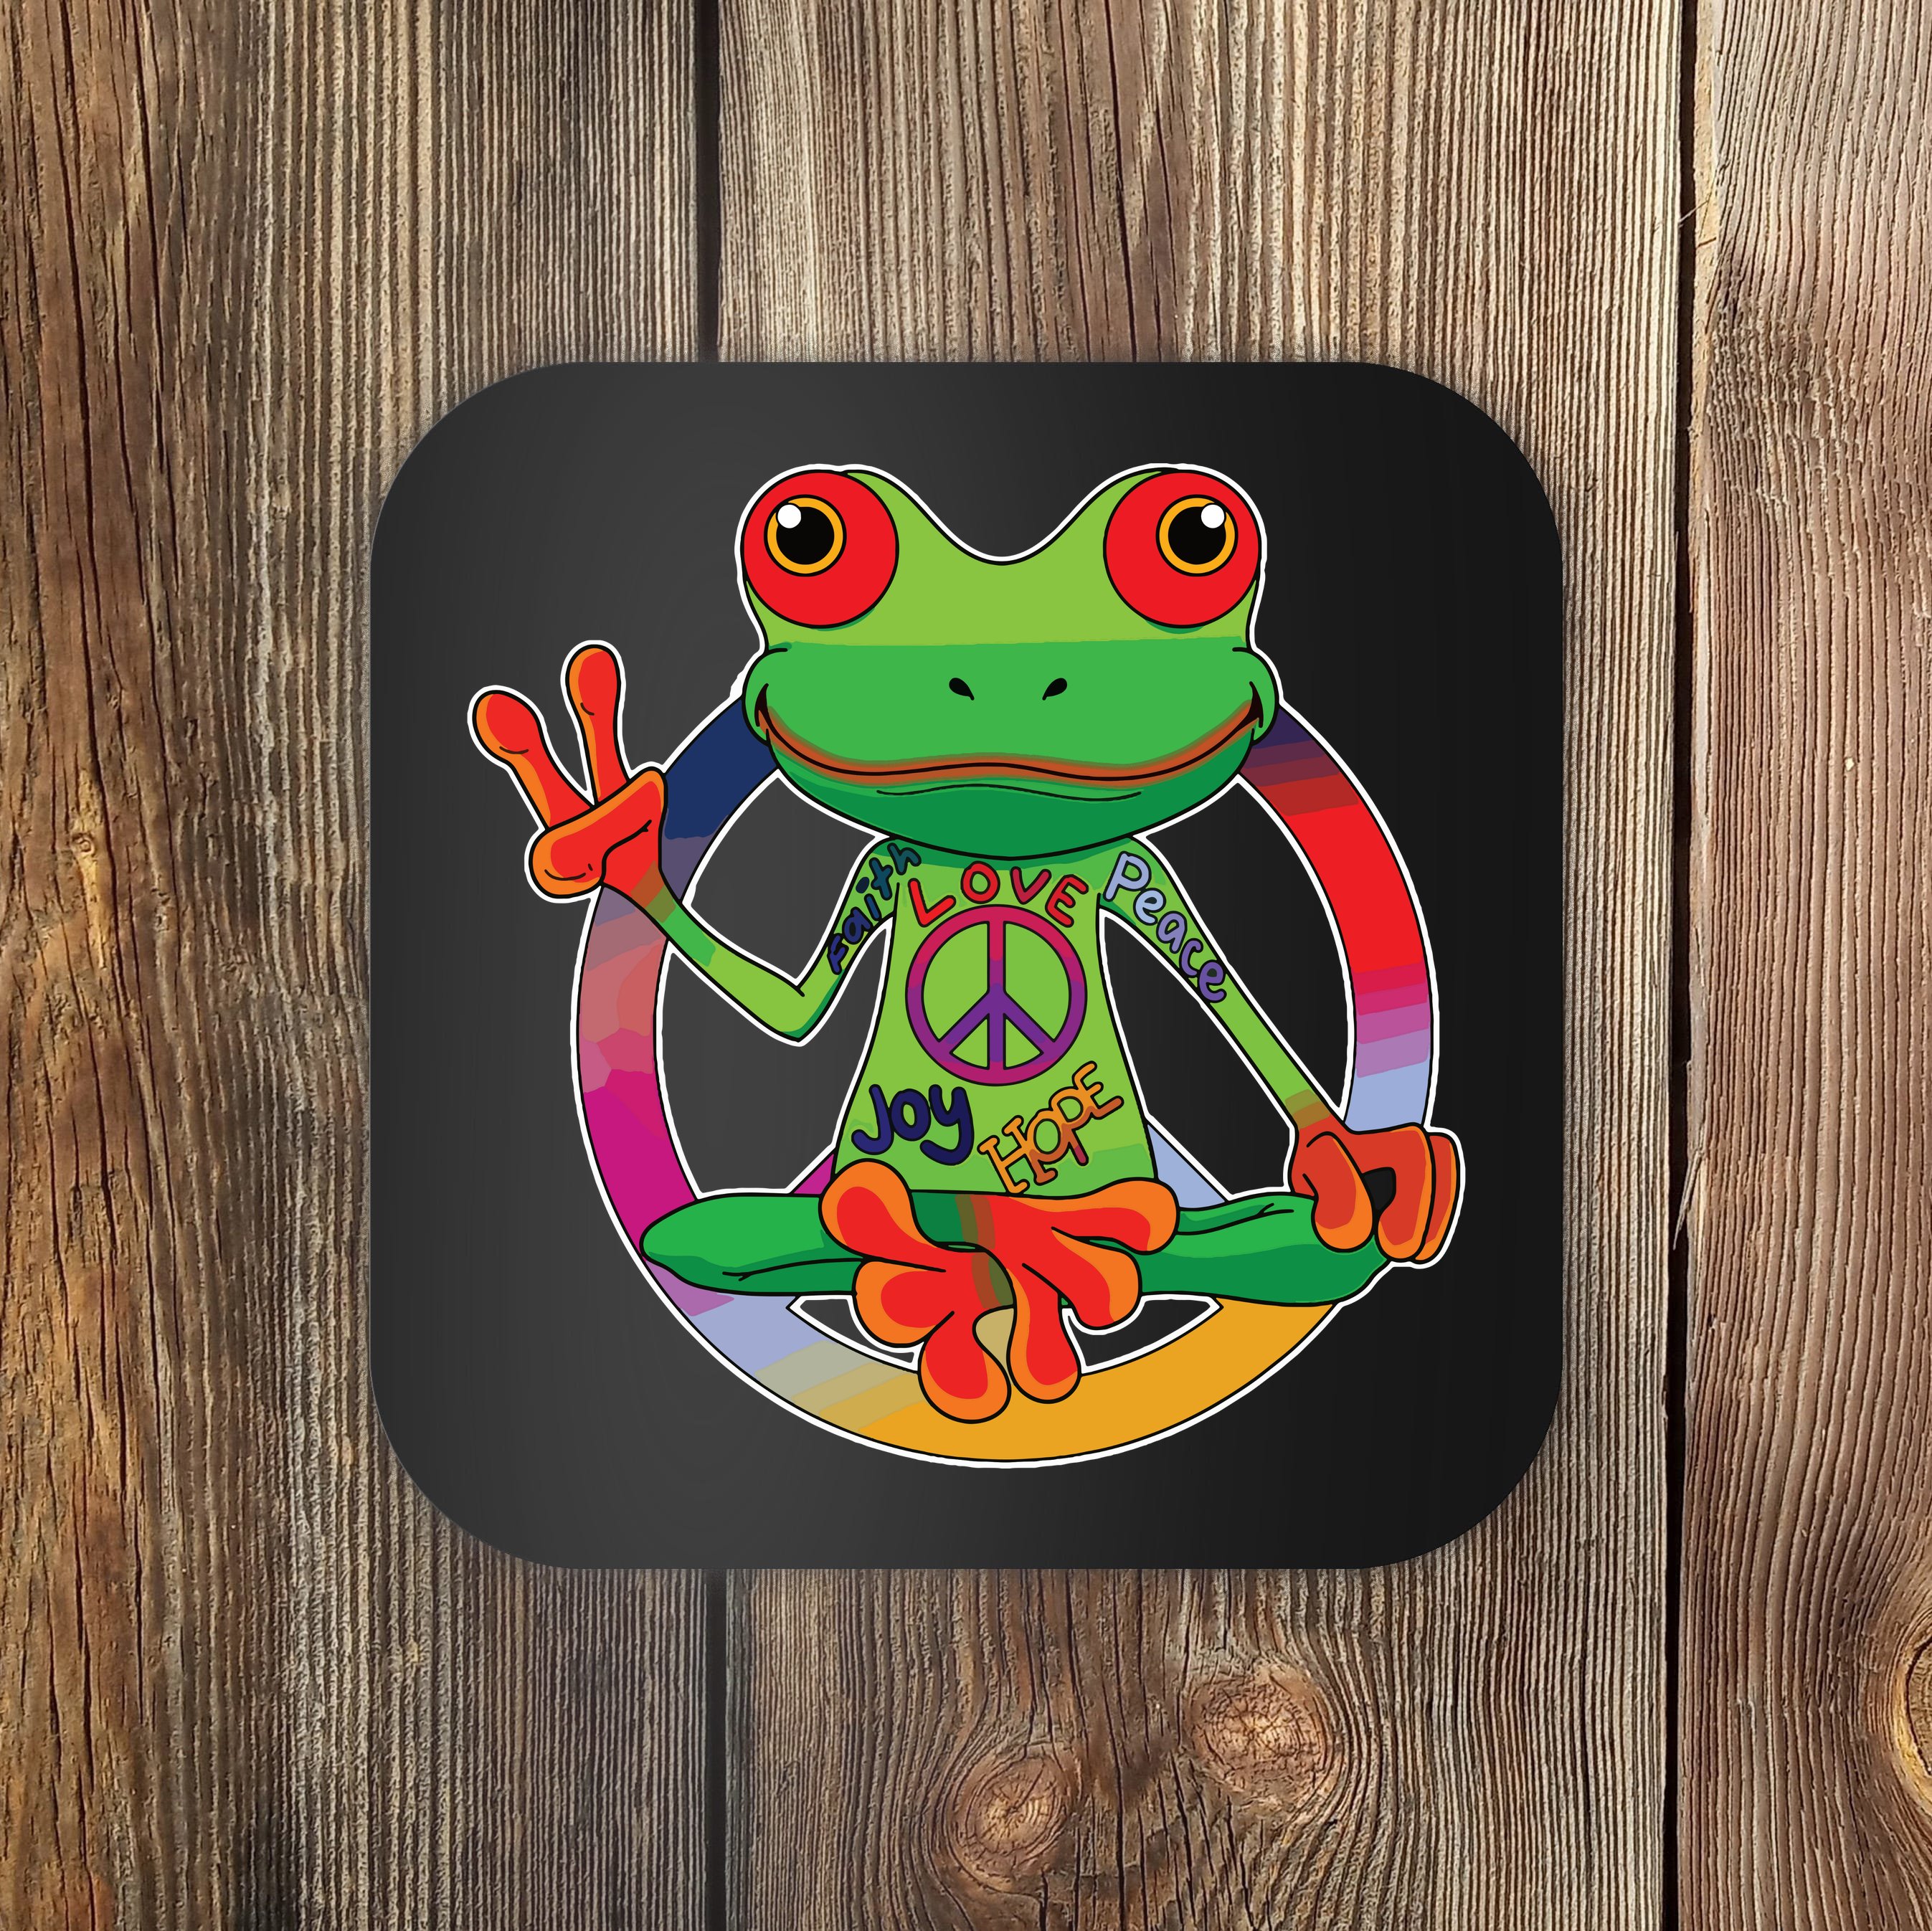 Hippie Frog Peace Sign Yoga Frogs Hippies 70s Coaster Teeshirtpalace